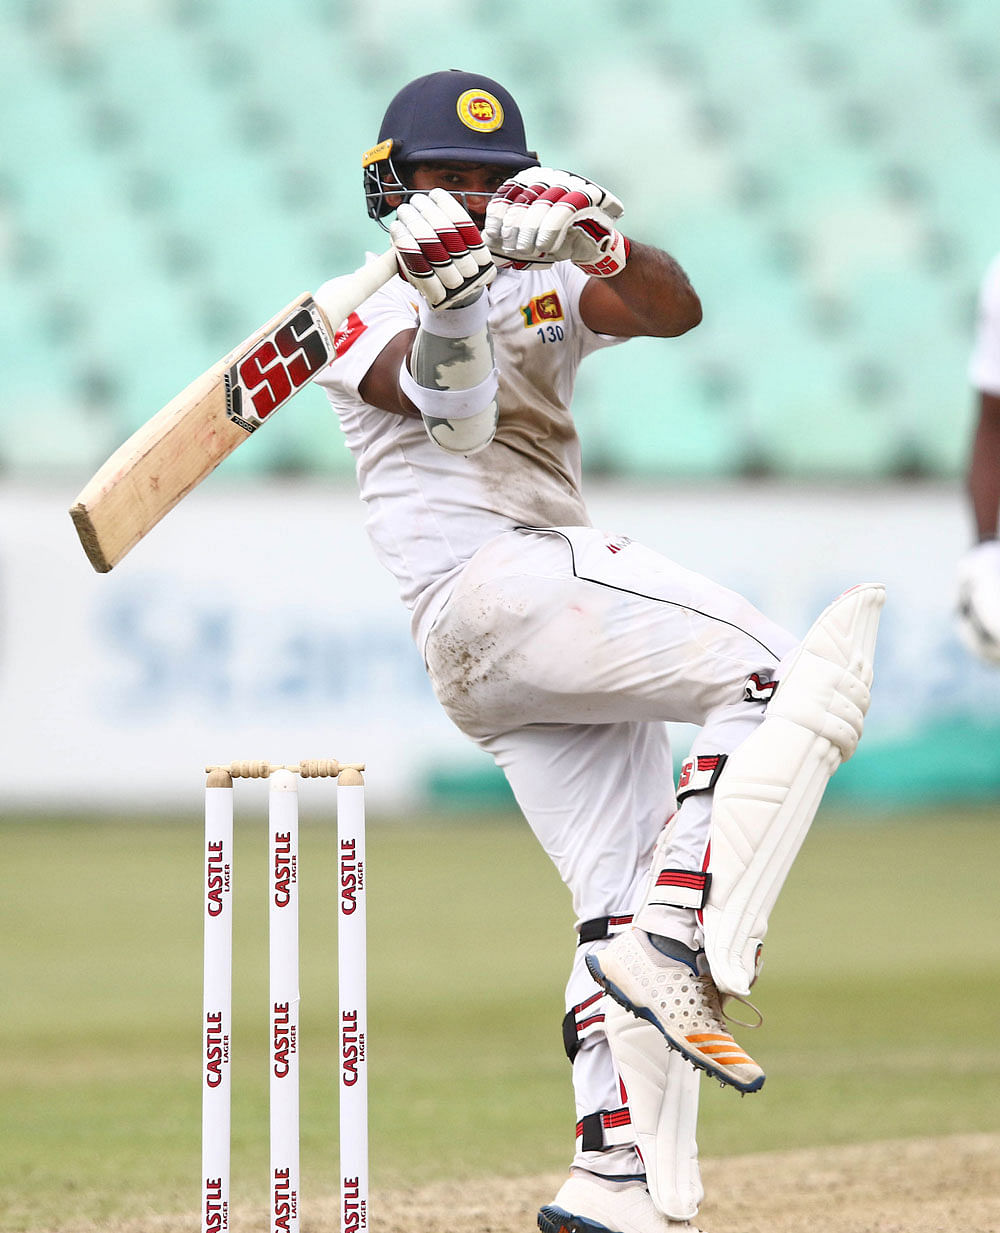 Sri Lanka`s Kusal Perera bats on day 4 of the first Test match between South Africa and Sri Lanka held at the Kingsmead Stadium in Durban on 16 February 2019. Photo: AFP